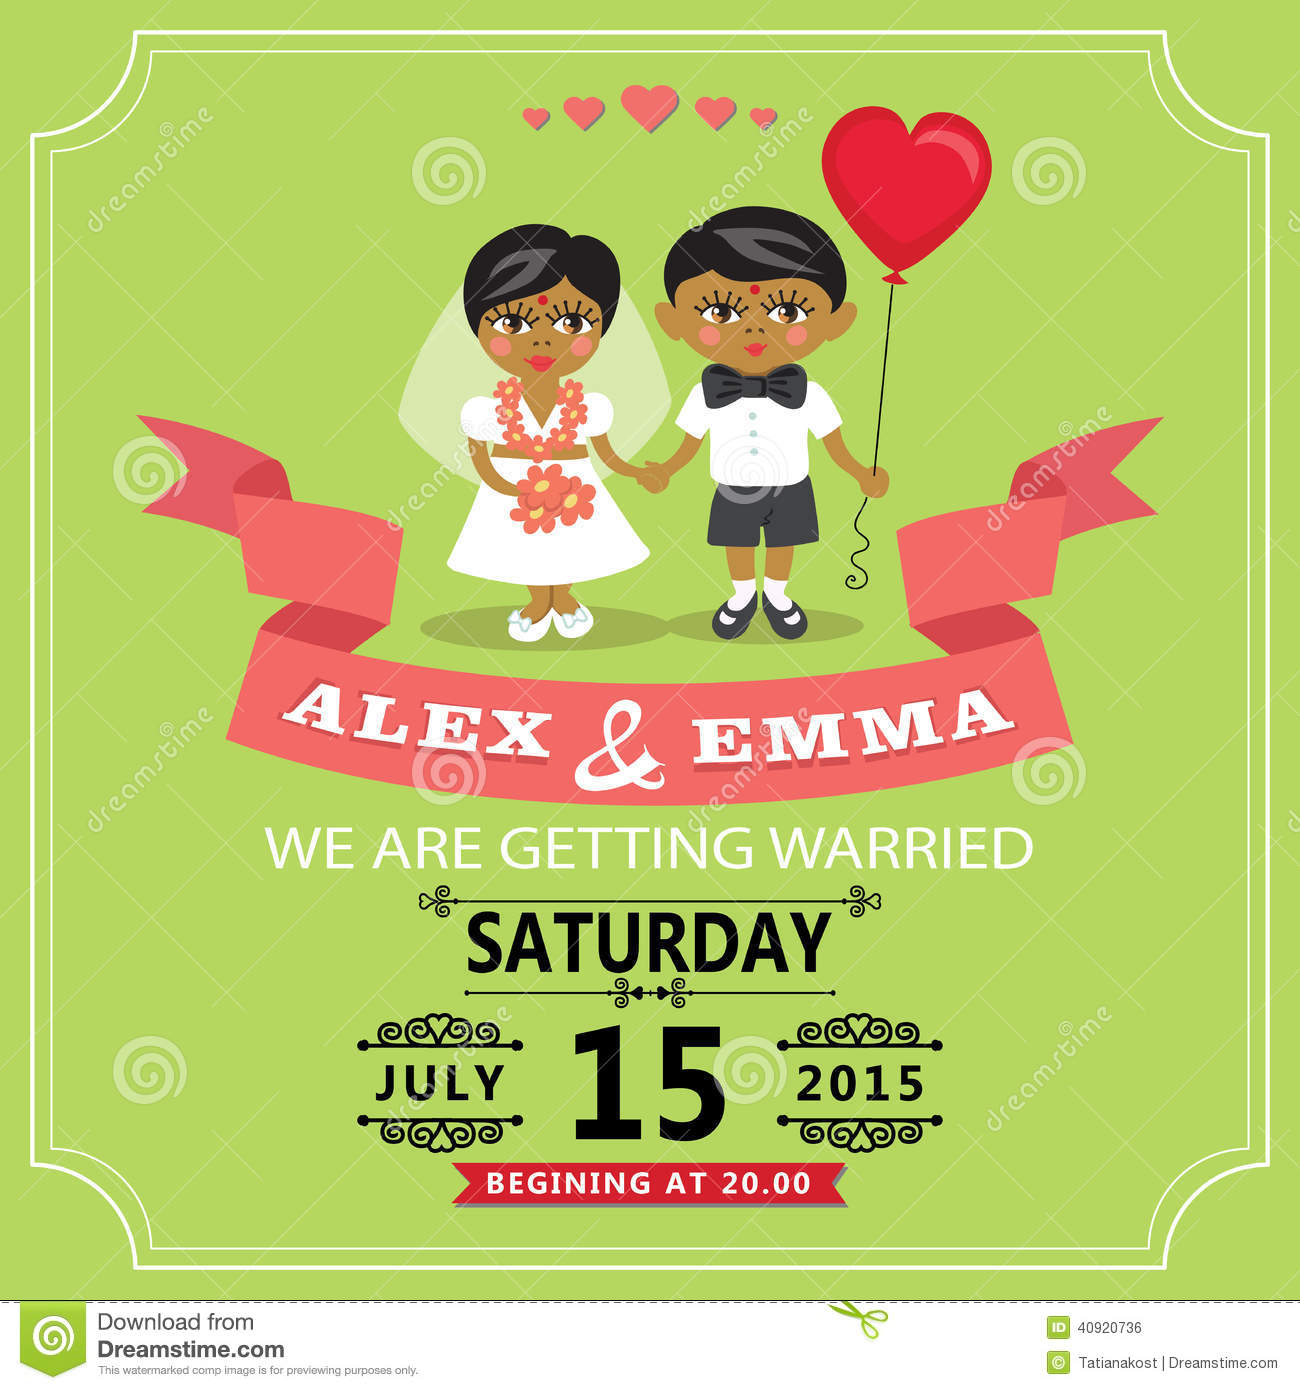 Animated Wedding Invitation Cards Free Download - triyellow